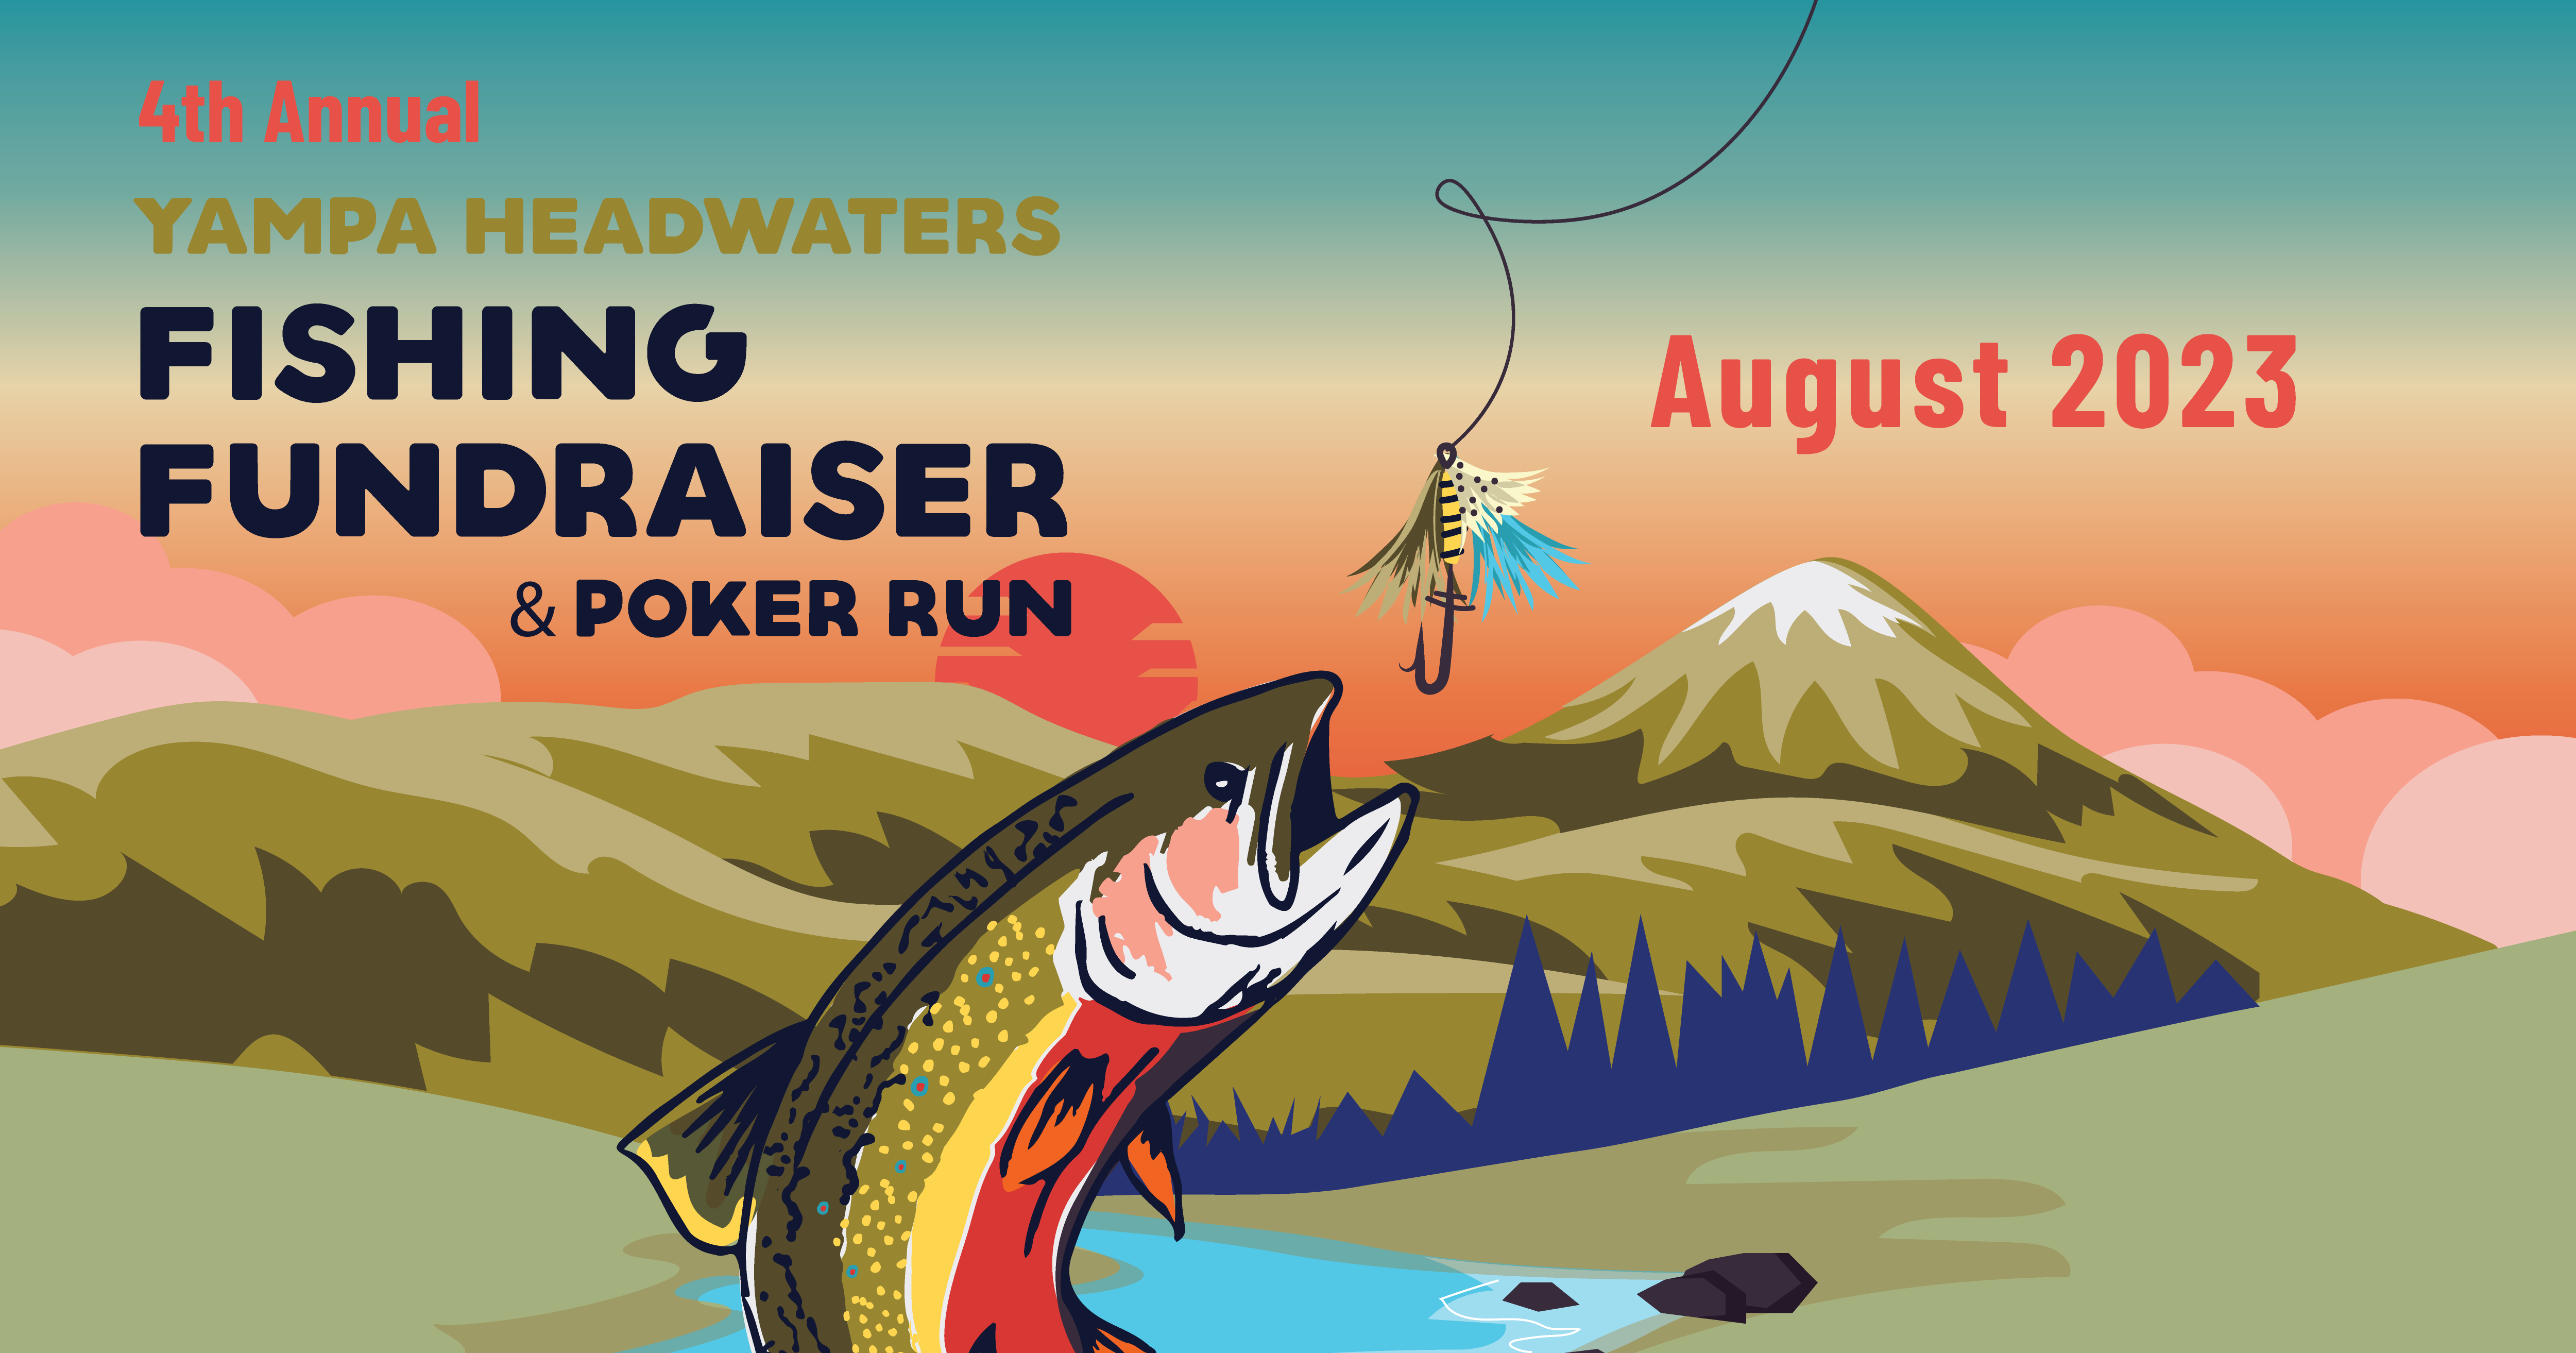 Yampa Headwaters Fishing Fundraiser and Poker Run - Friends of the